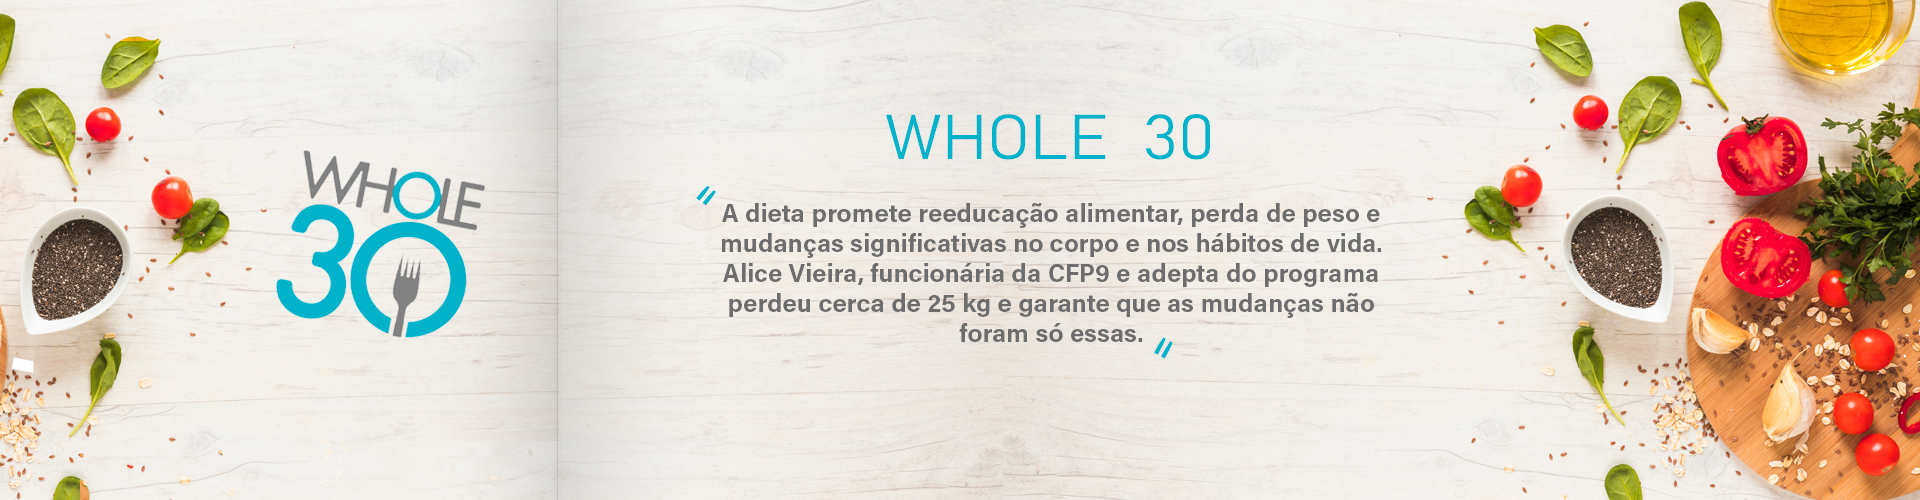 Banner Whole 30